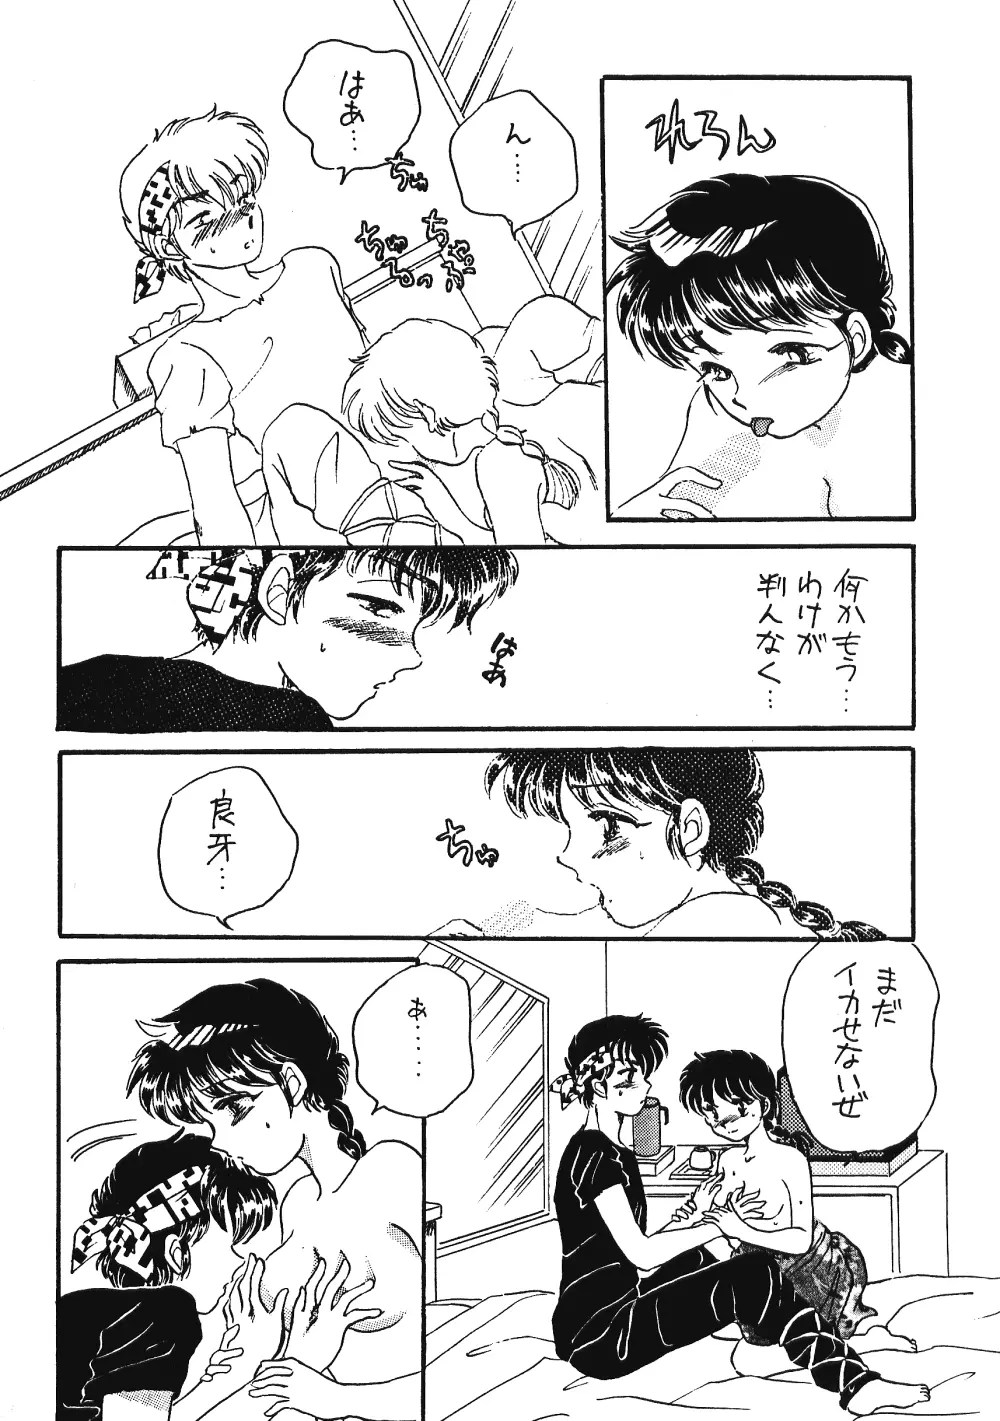 Pスポットの誘惑 - Special Page.9